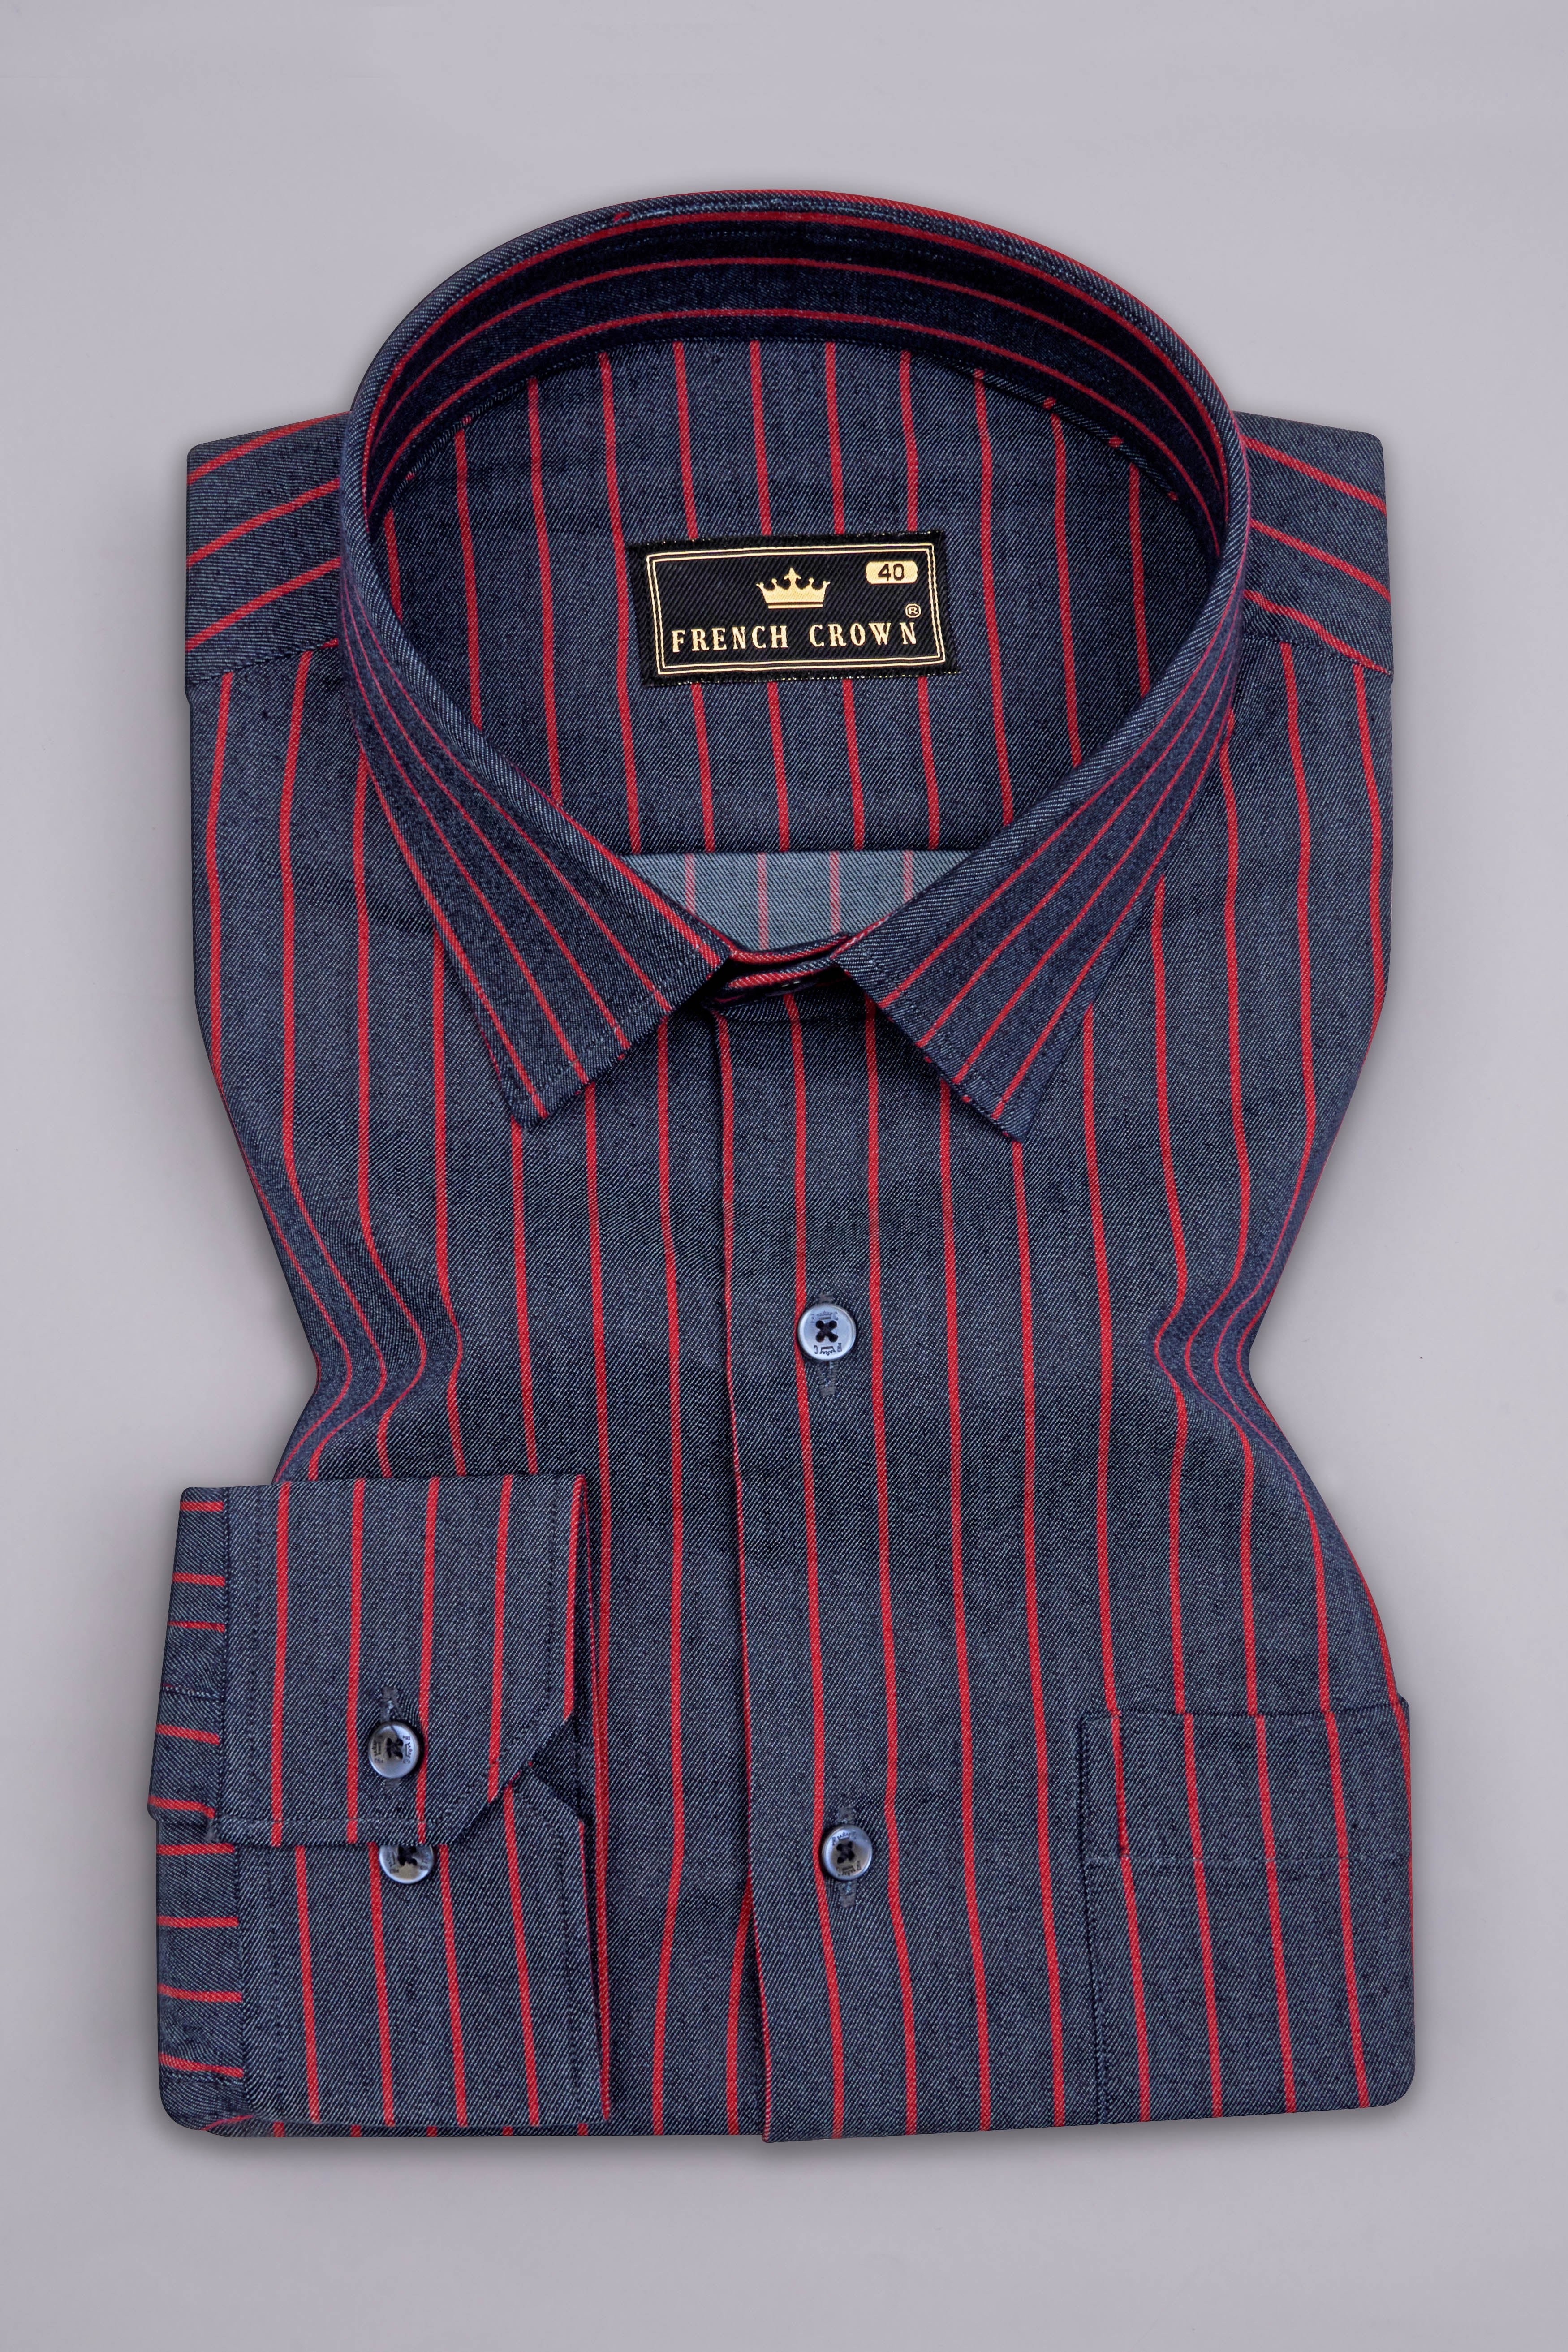 Martinique Navy Blue with Blossom Red Premium Twill Striped Shirt